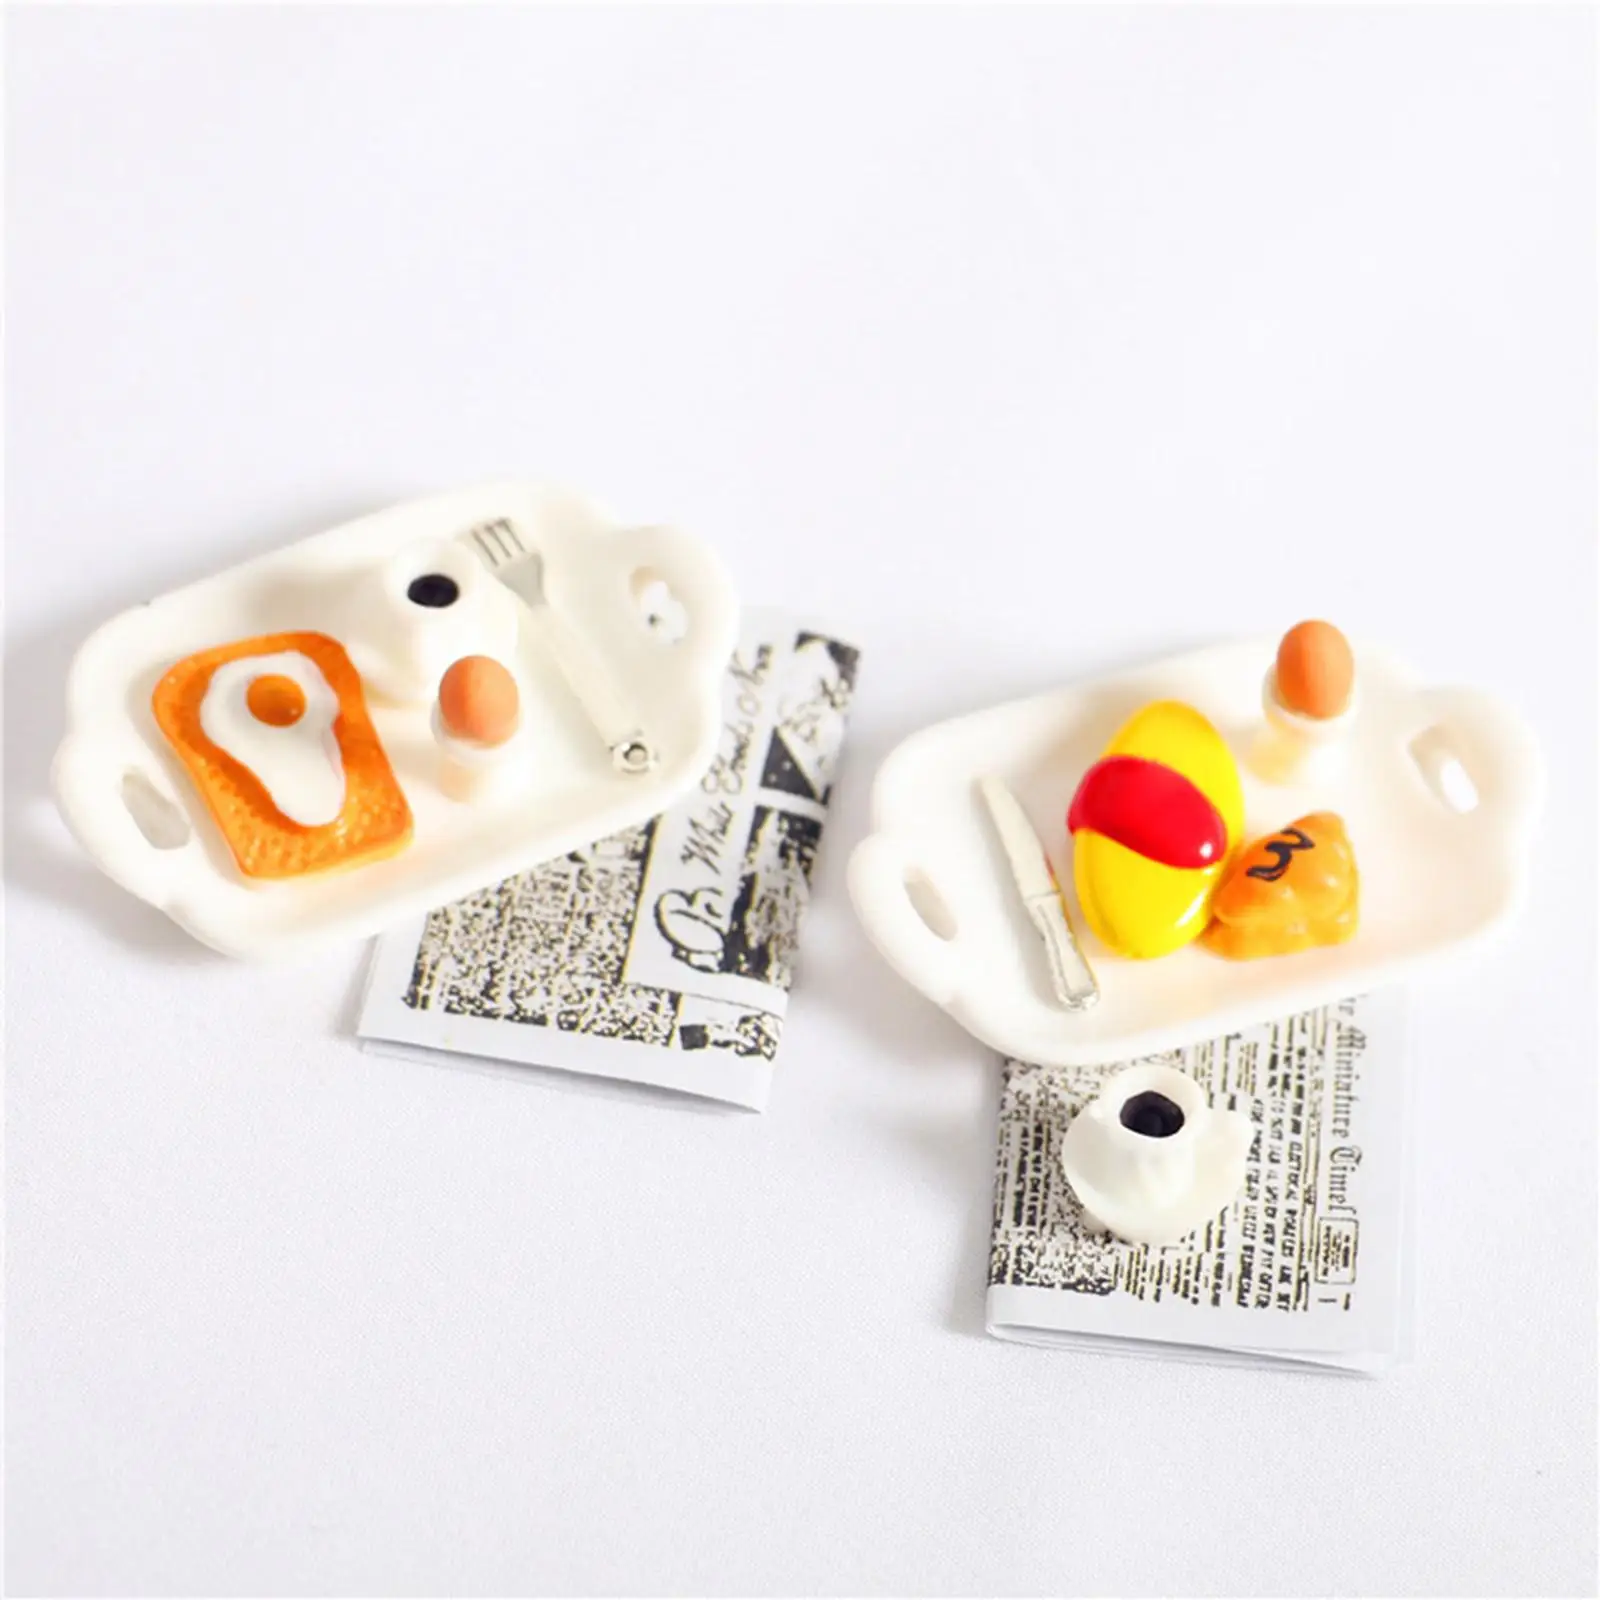 1:12 Dollhouse Food Set Baking Supplies Assorted Pastry Toy Cooking Game Tiny Food Model for Diorama